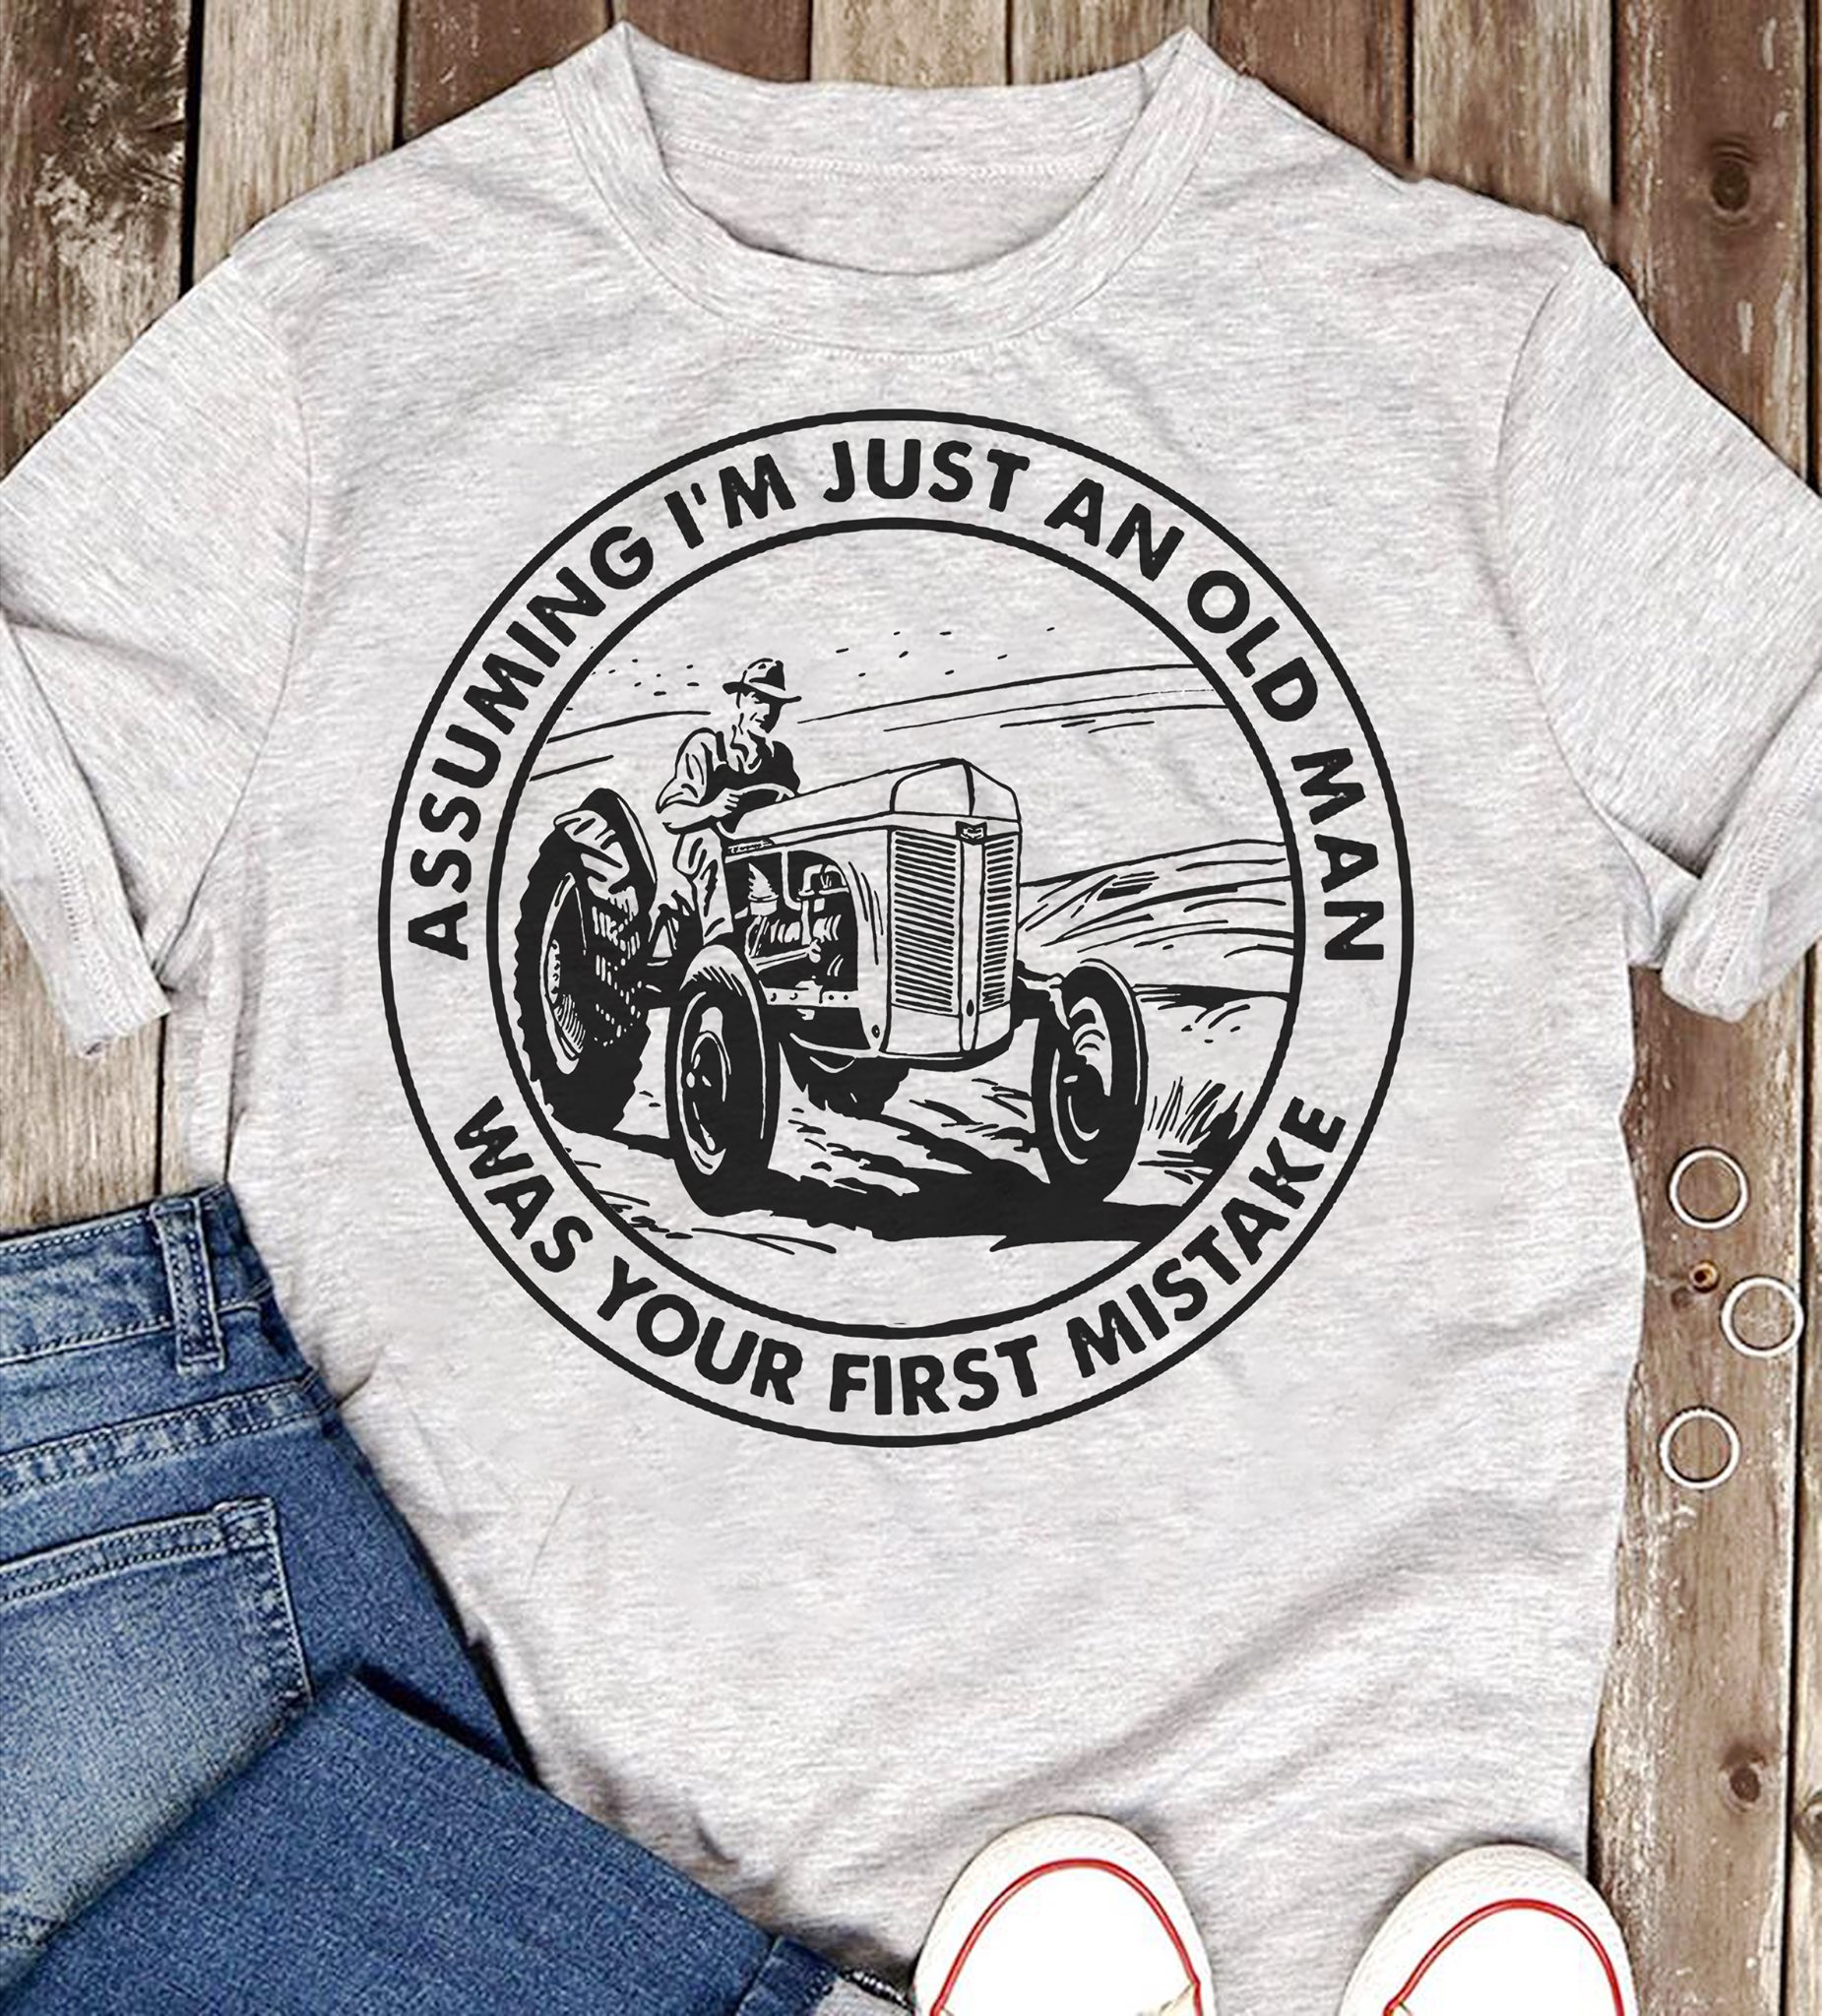 Man Riding Tractor - Assuming I’m Just An Old Man Was Your First Mistake